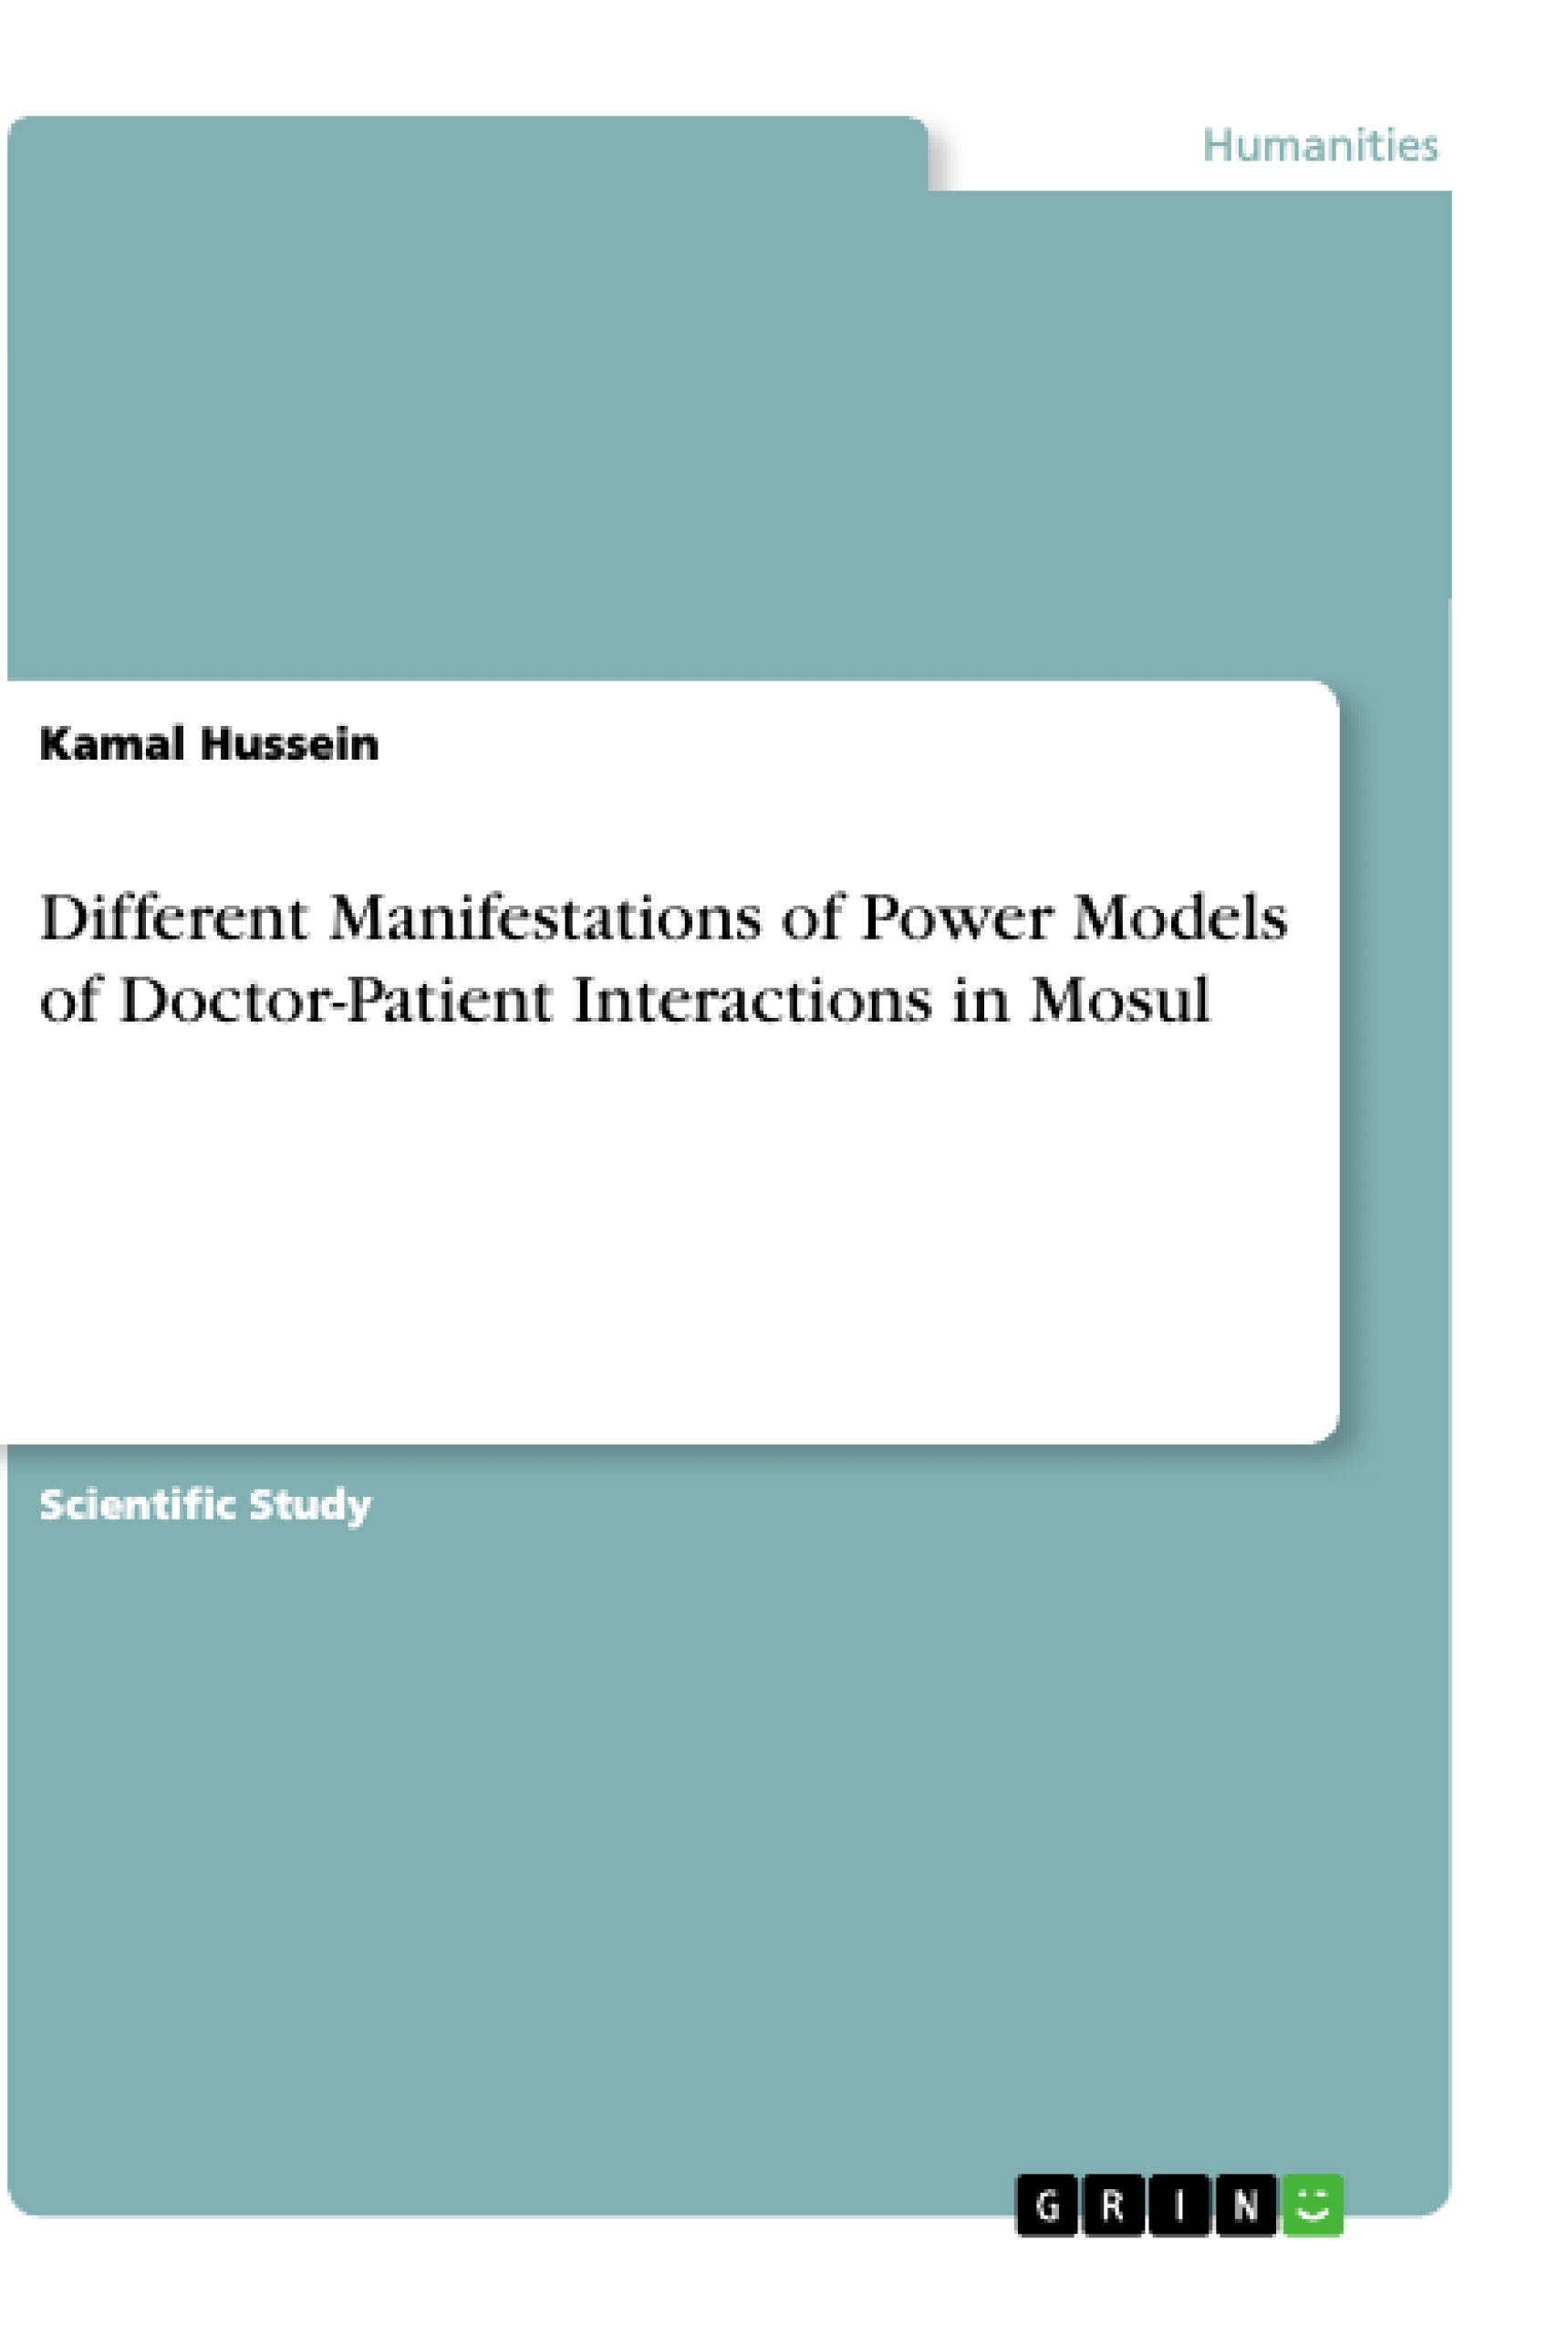 Titre: Different Manifestations of Power Models of Doctor-Patient Interactions in Mosul